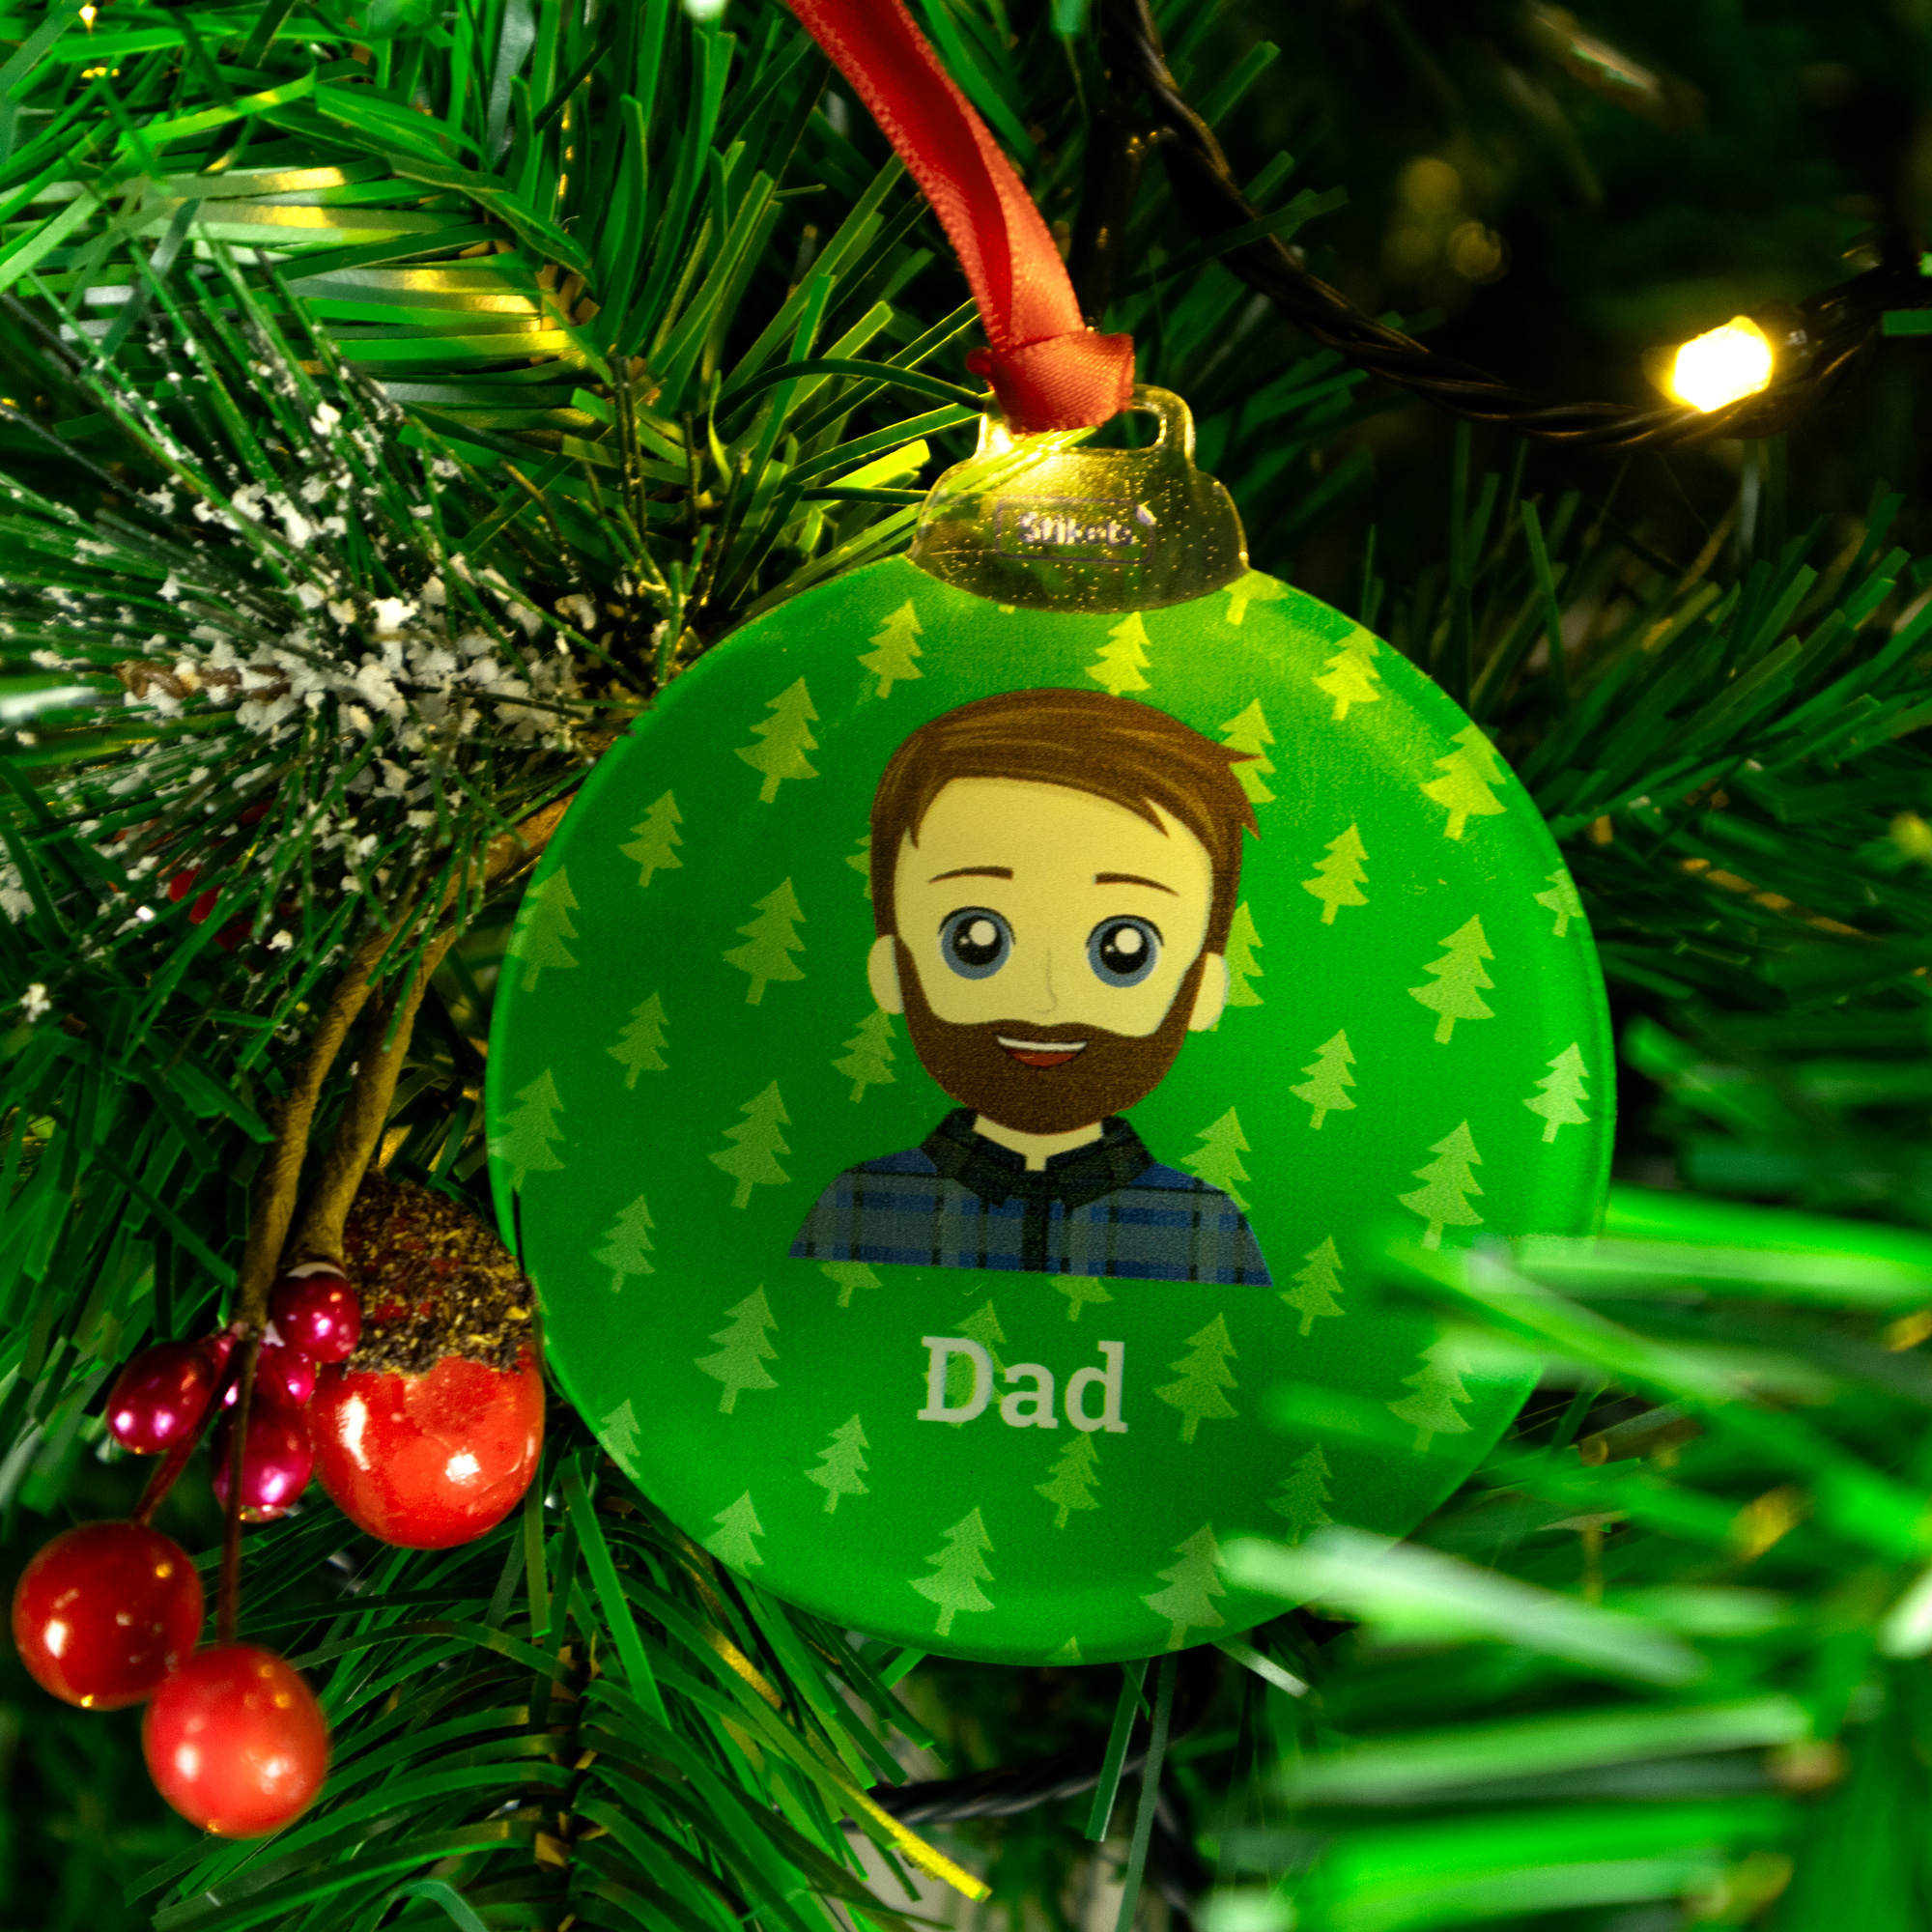 Personalised Christmas Baubles with Icon